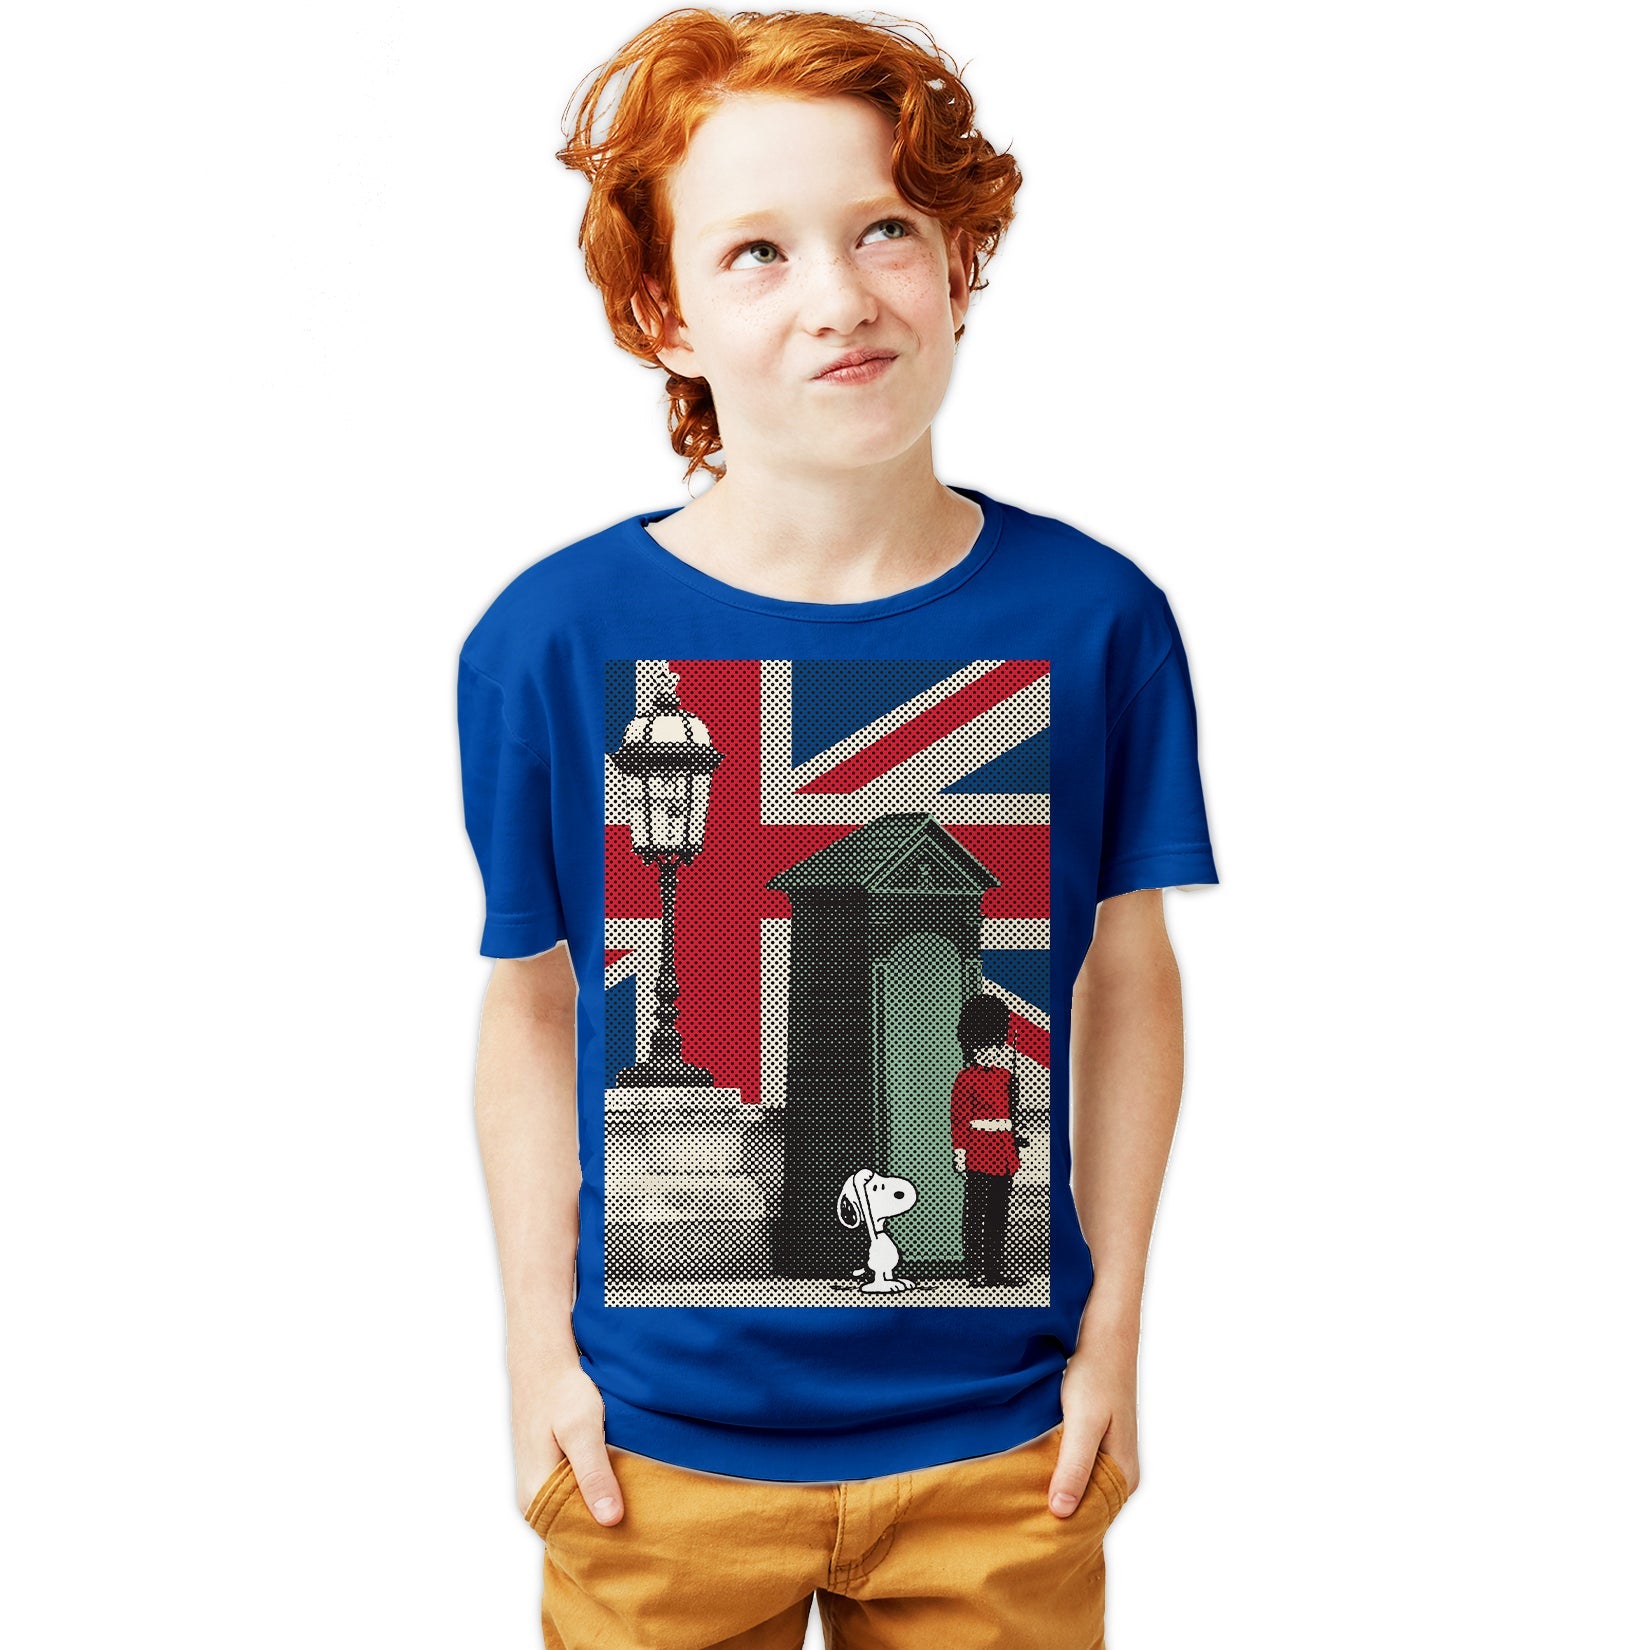 Peanuts Snoopy Remix UK Beefeater Official Youth T-Shirt